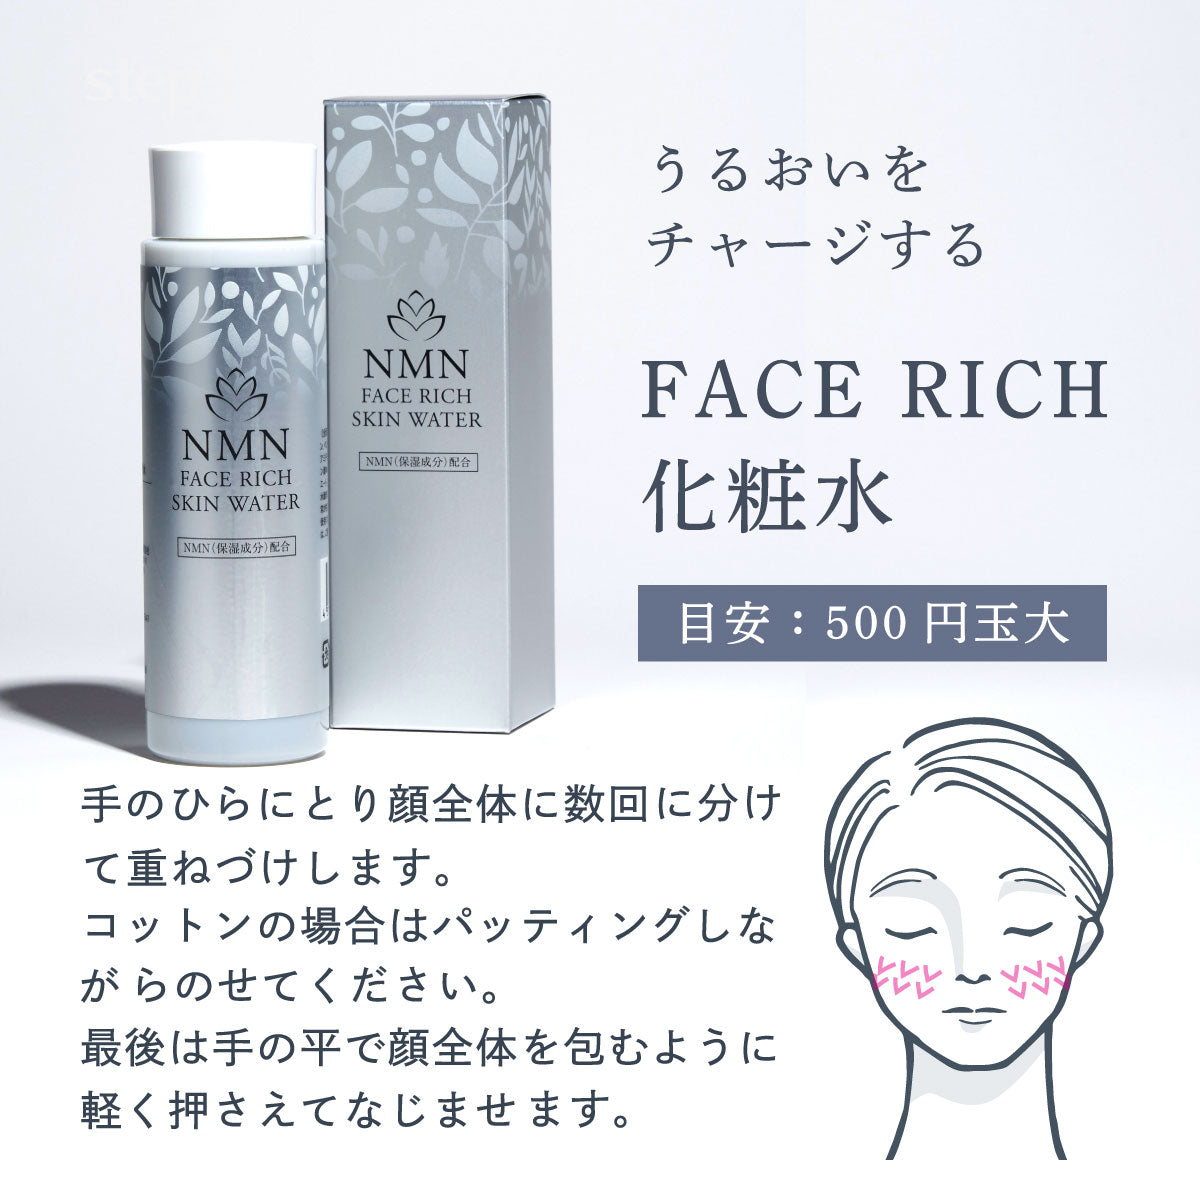 [Subscriptions]Face Rich Skin Water